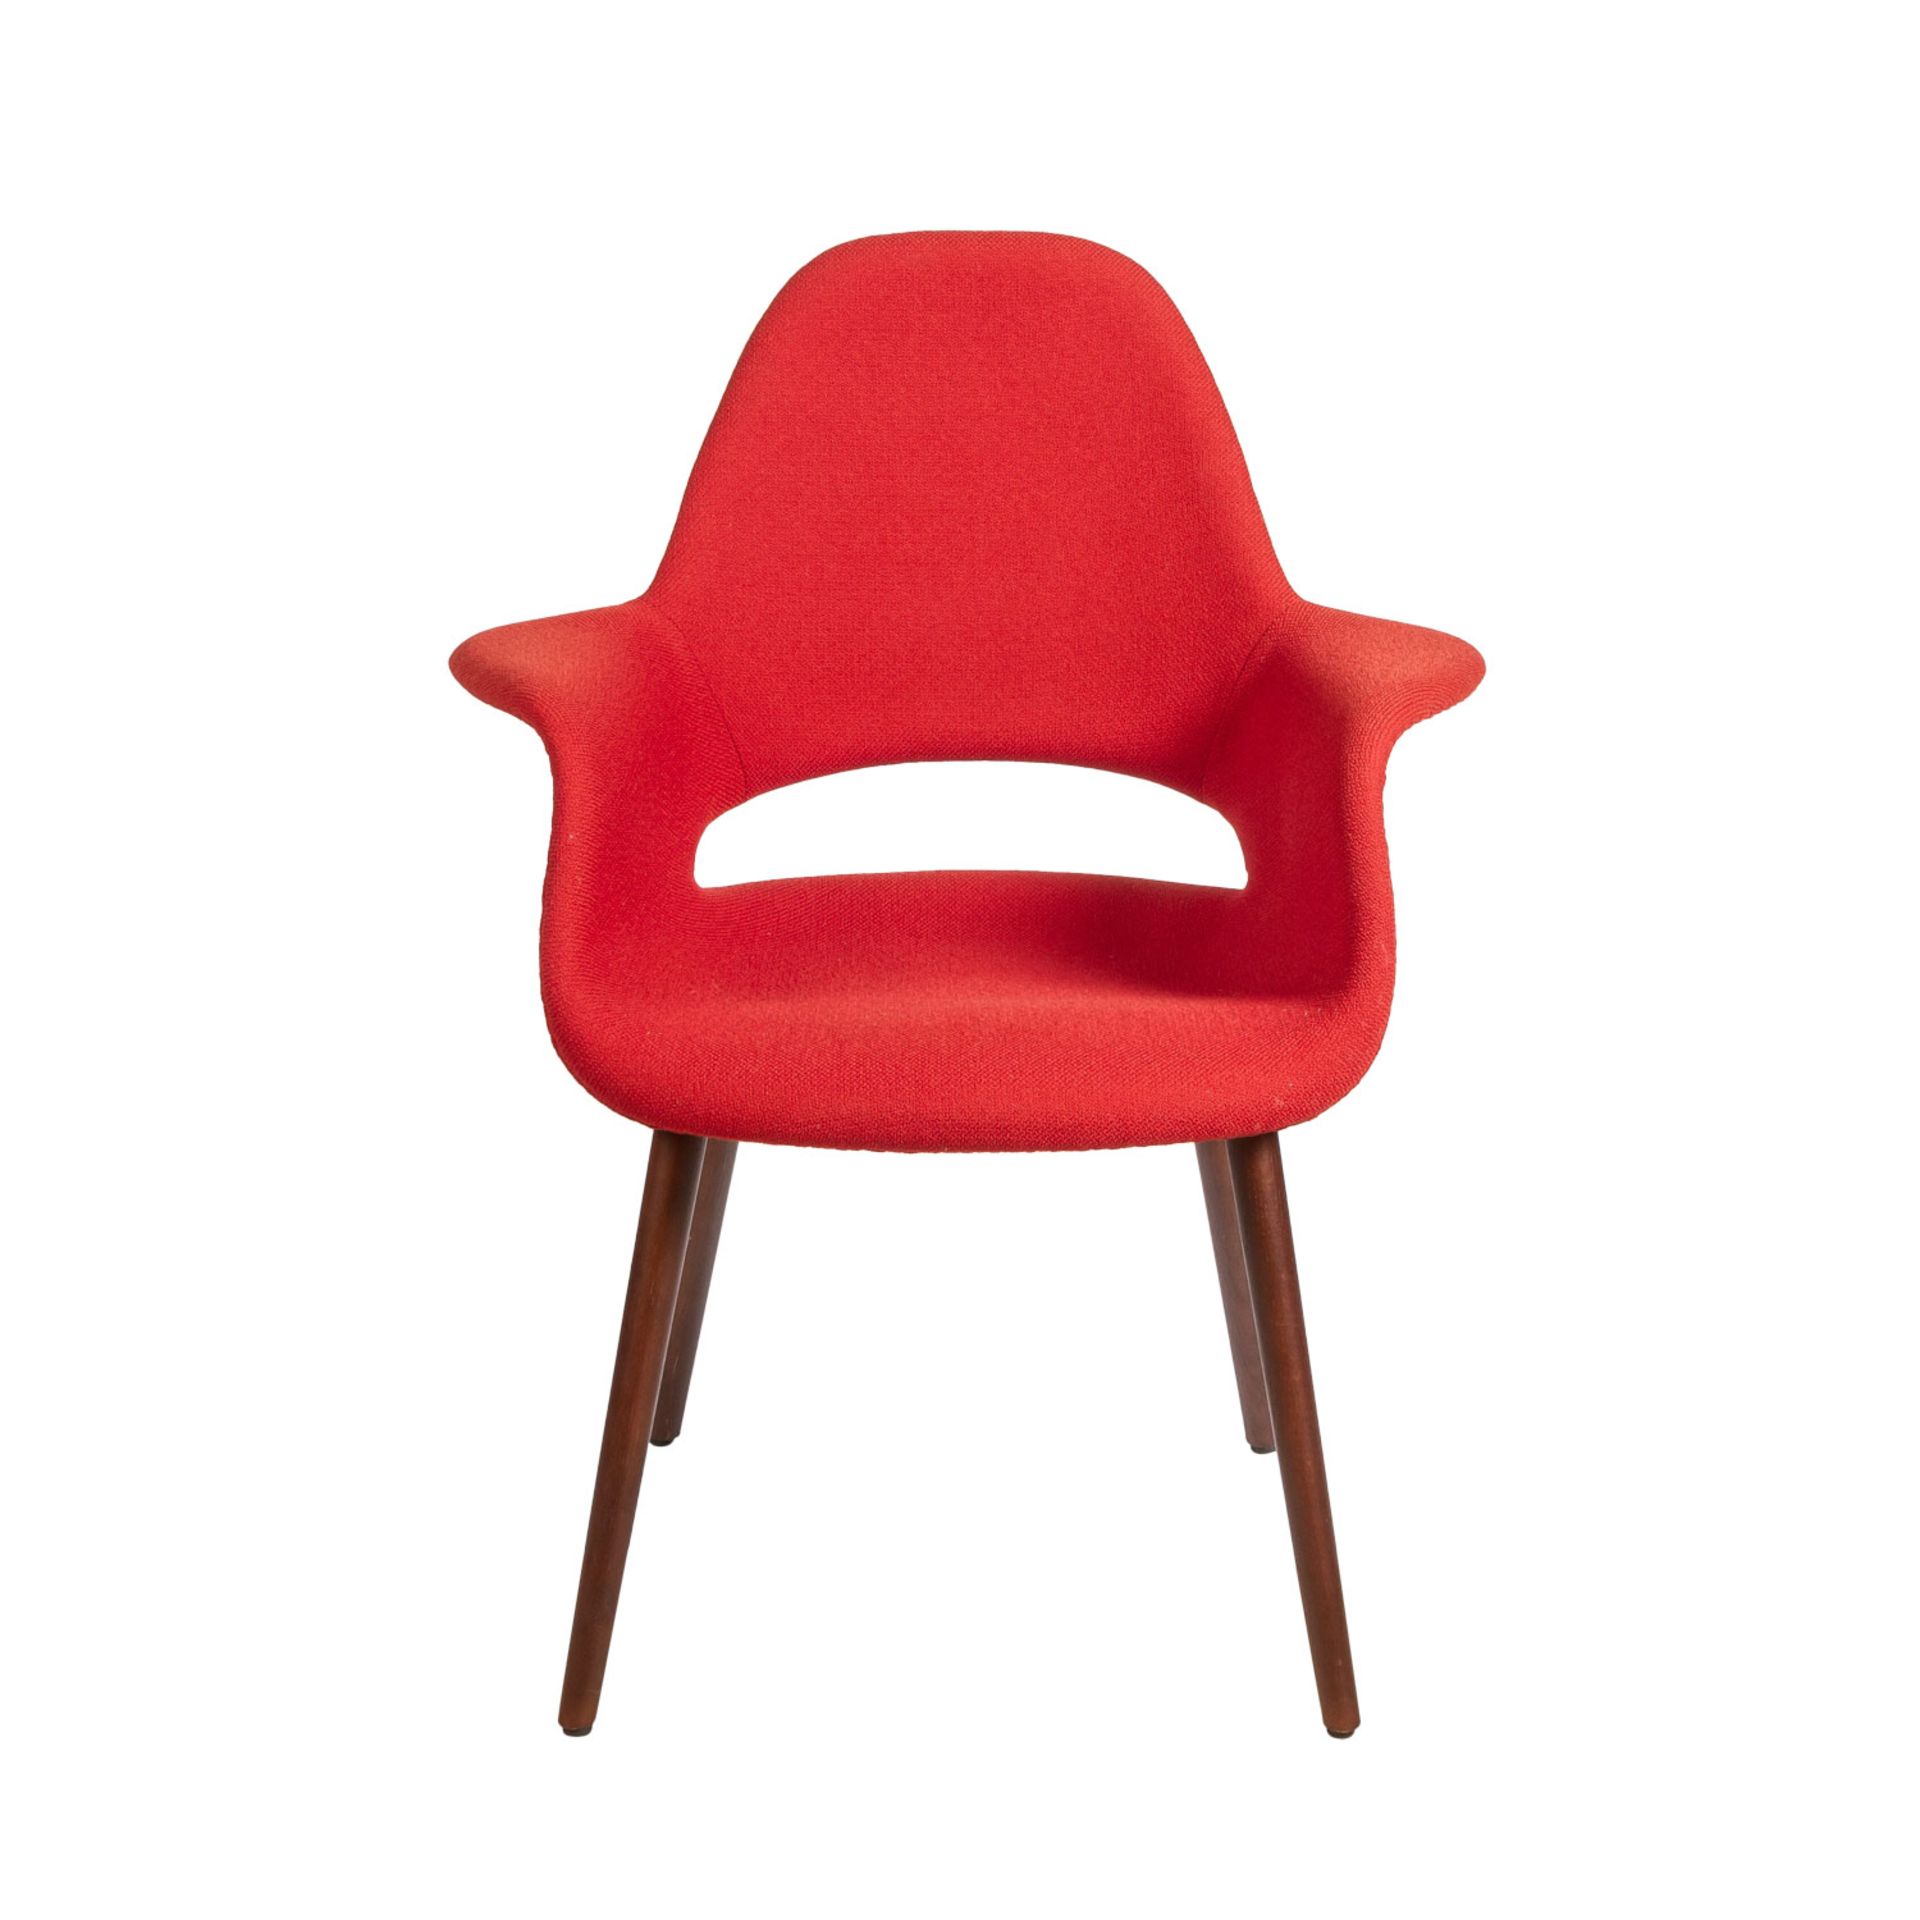 EERO SAARINEN & CHARLES EAMES "Zwei Ornanic Conference-Chair" Design des 20.Jh. - Image 2 of 6